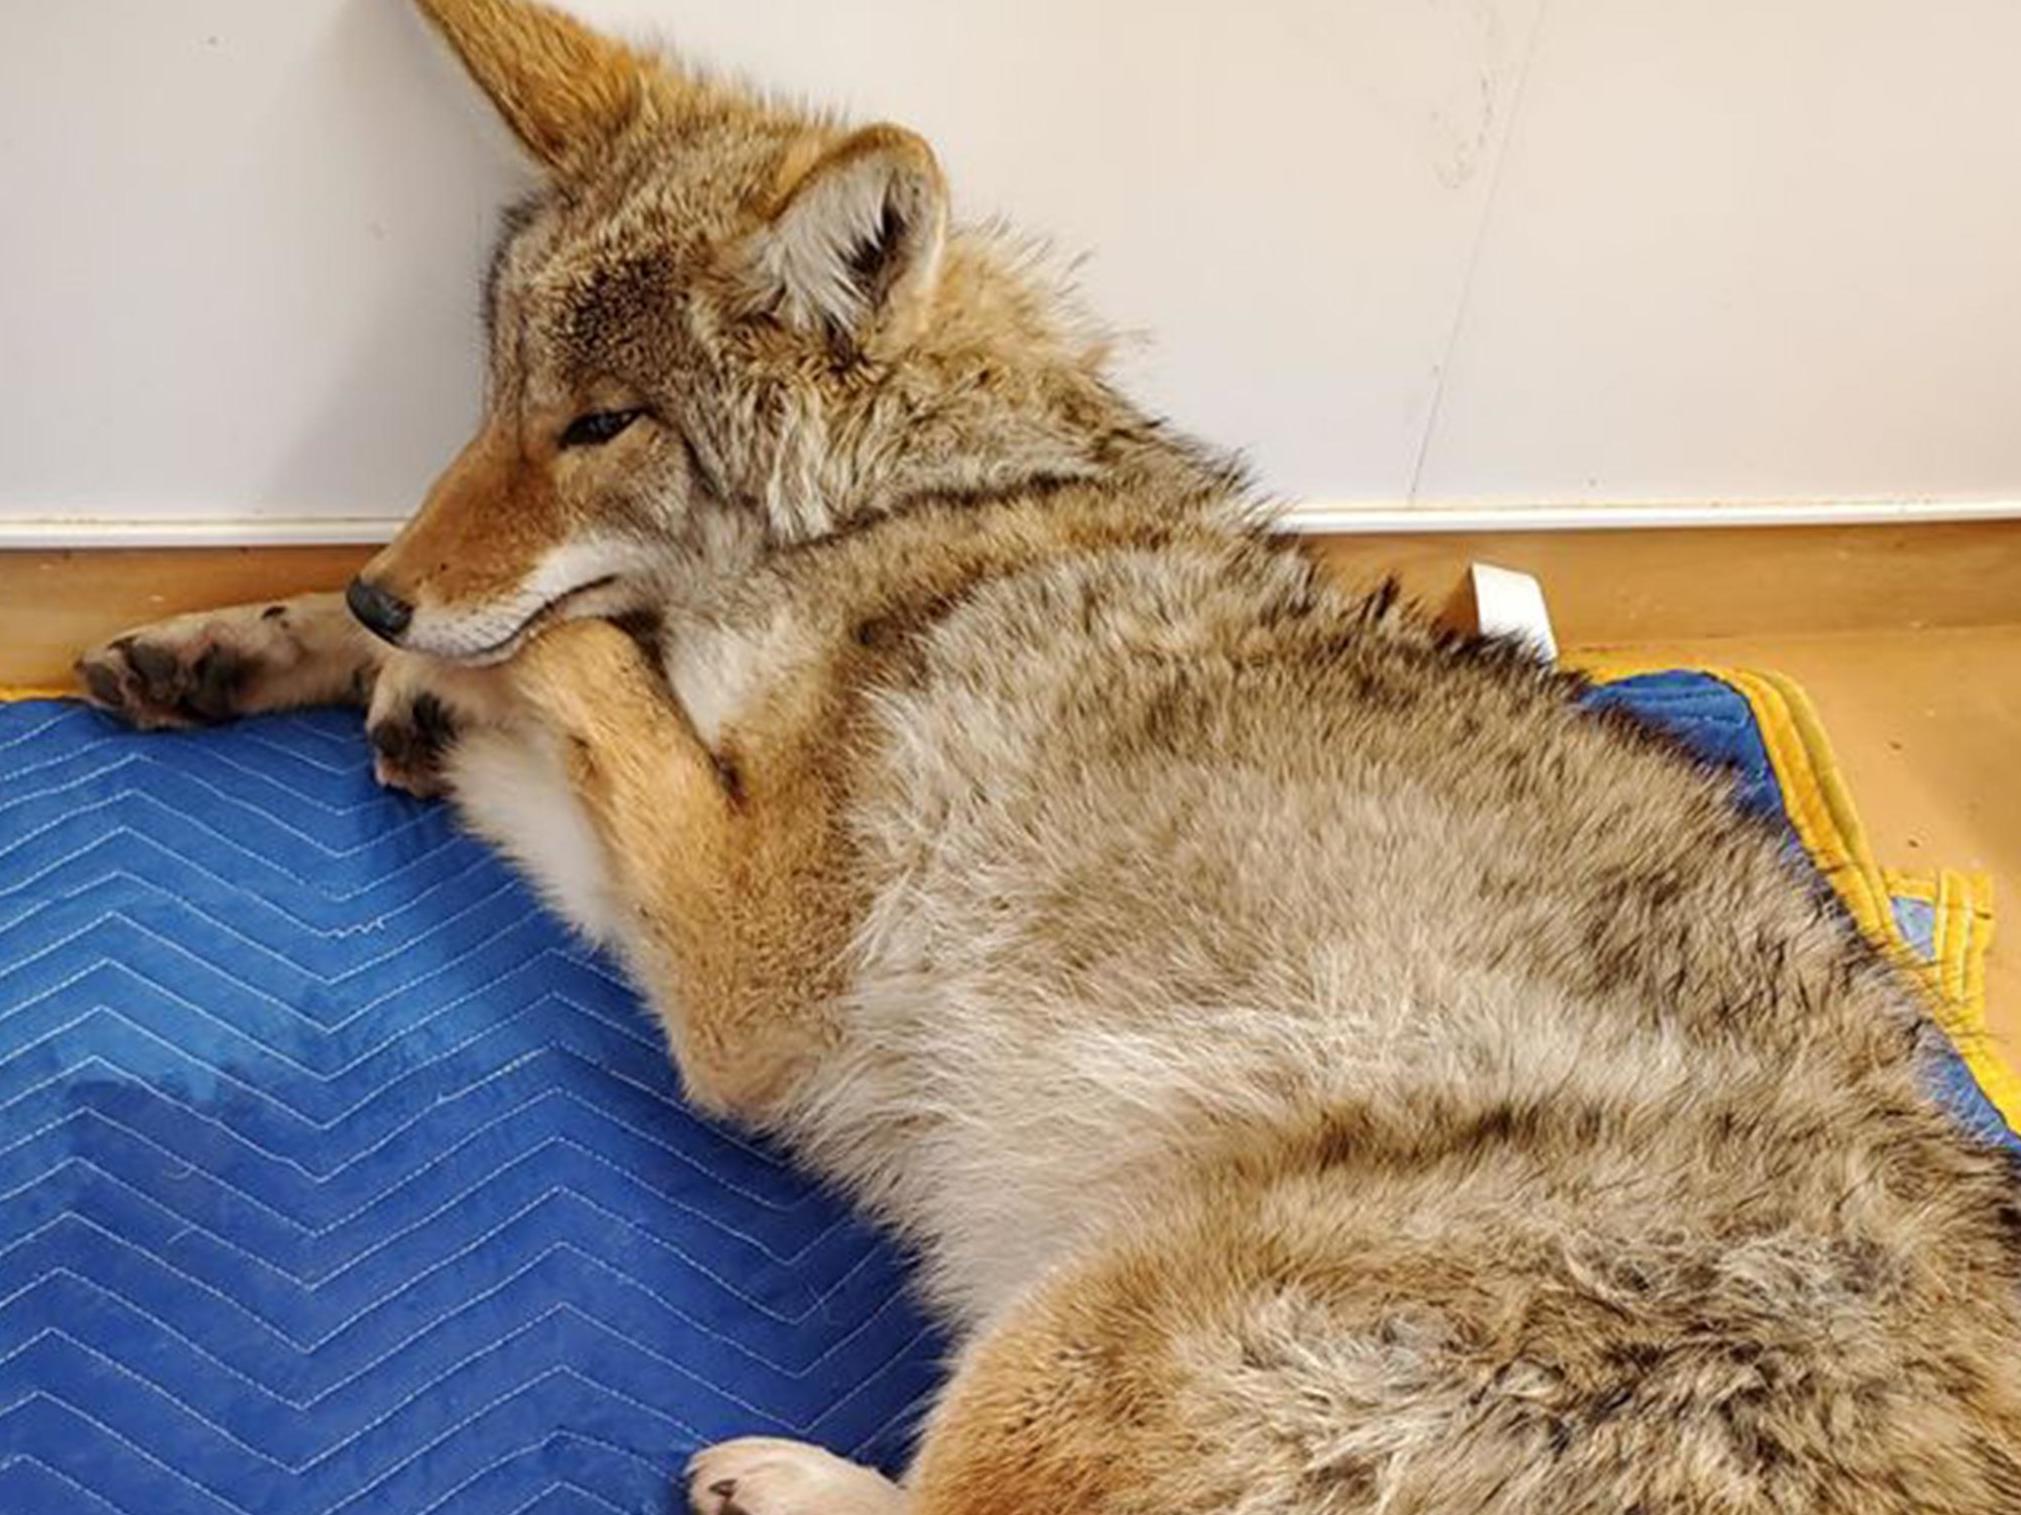 Having driven the animal to work Mr Boroditsky was informed it was, in fact, a coyote